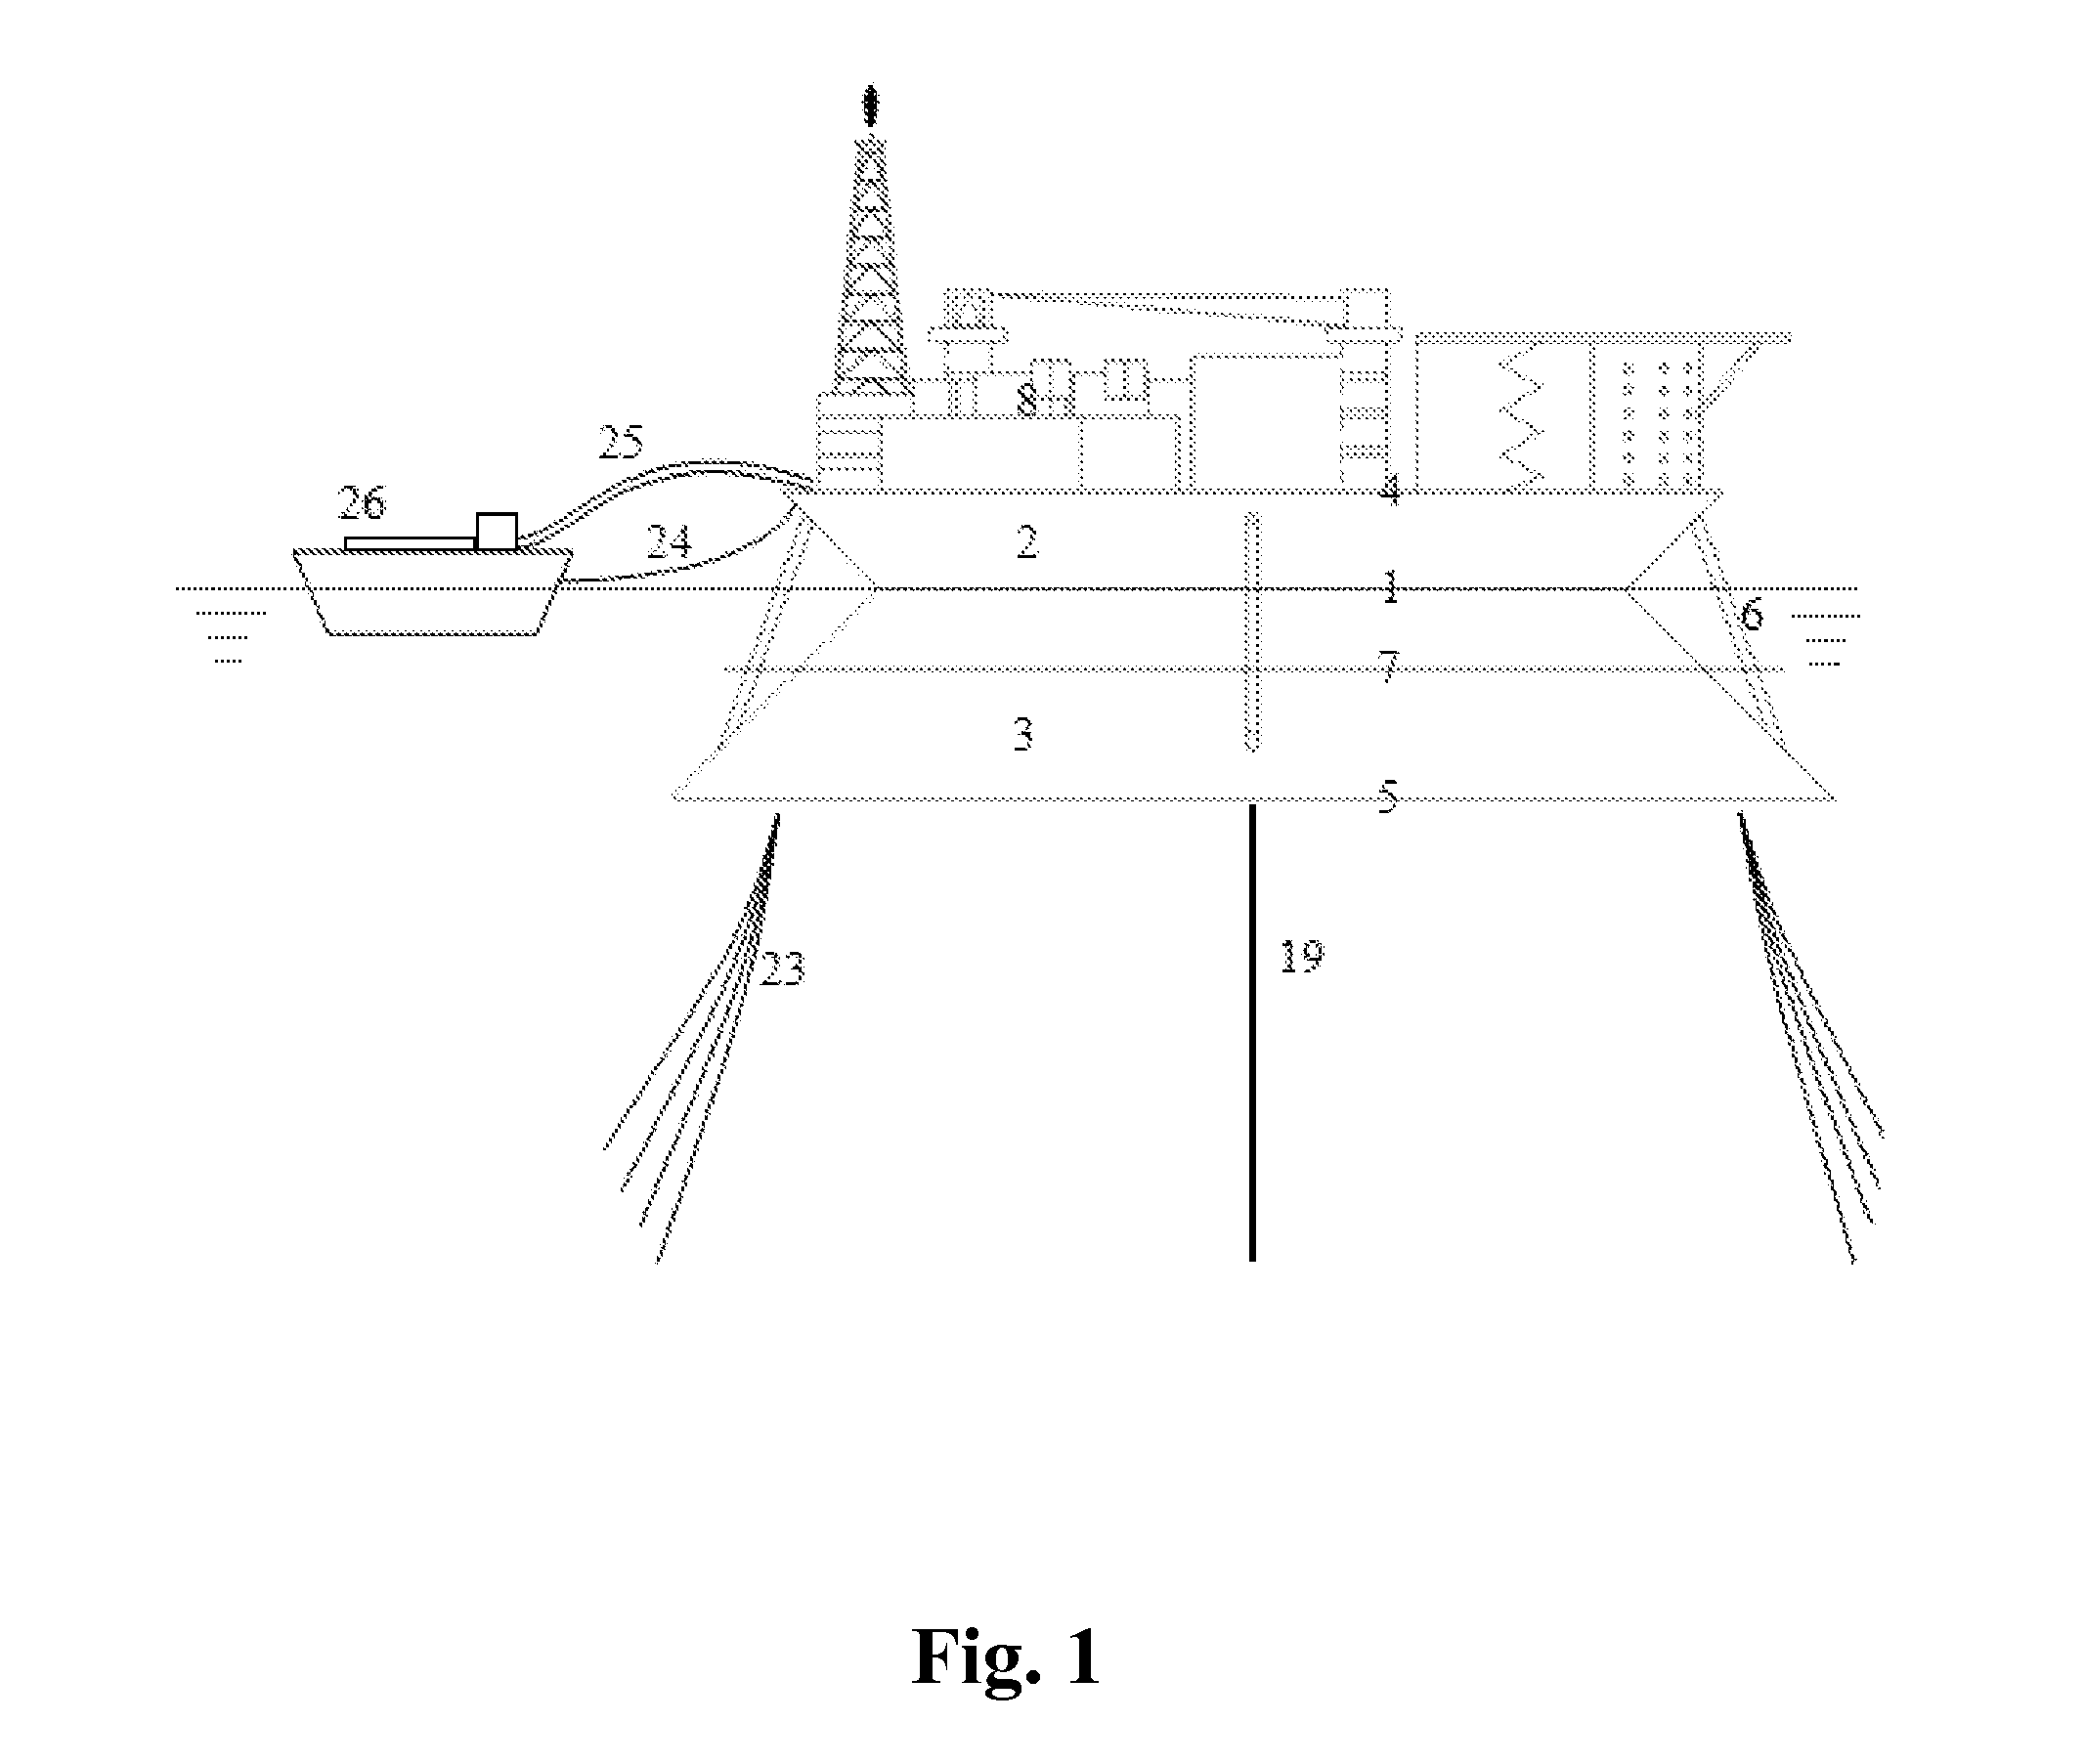 Butt joint octagonal frustum type floating production storage and offloading system